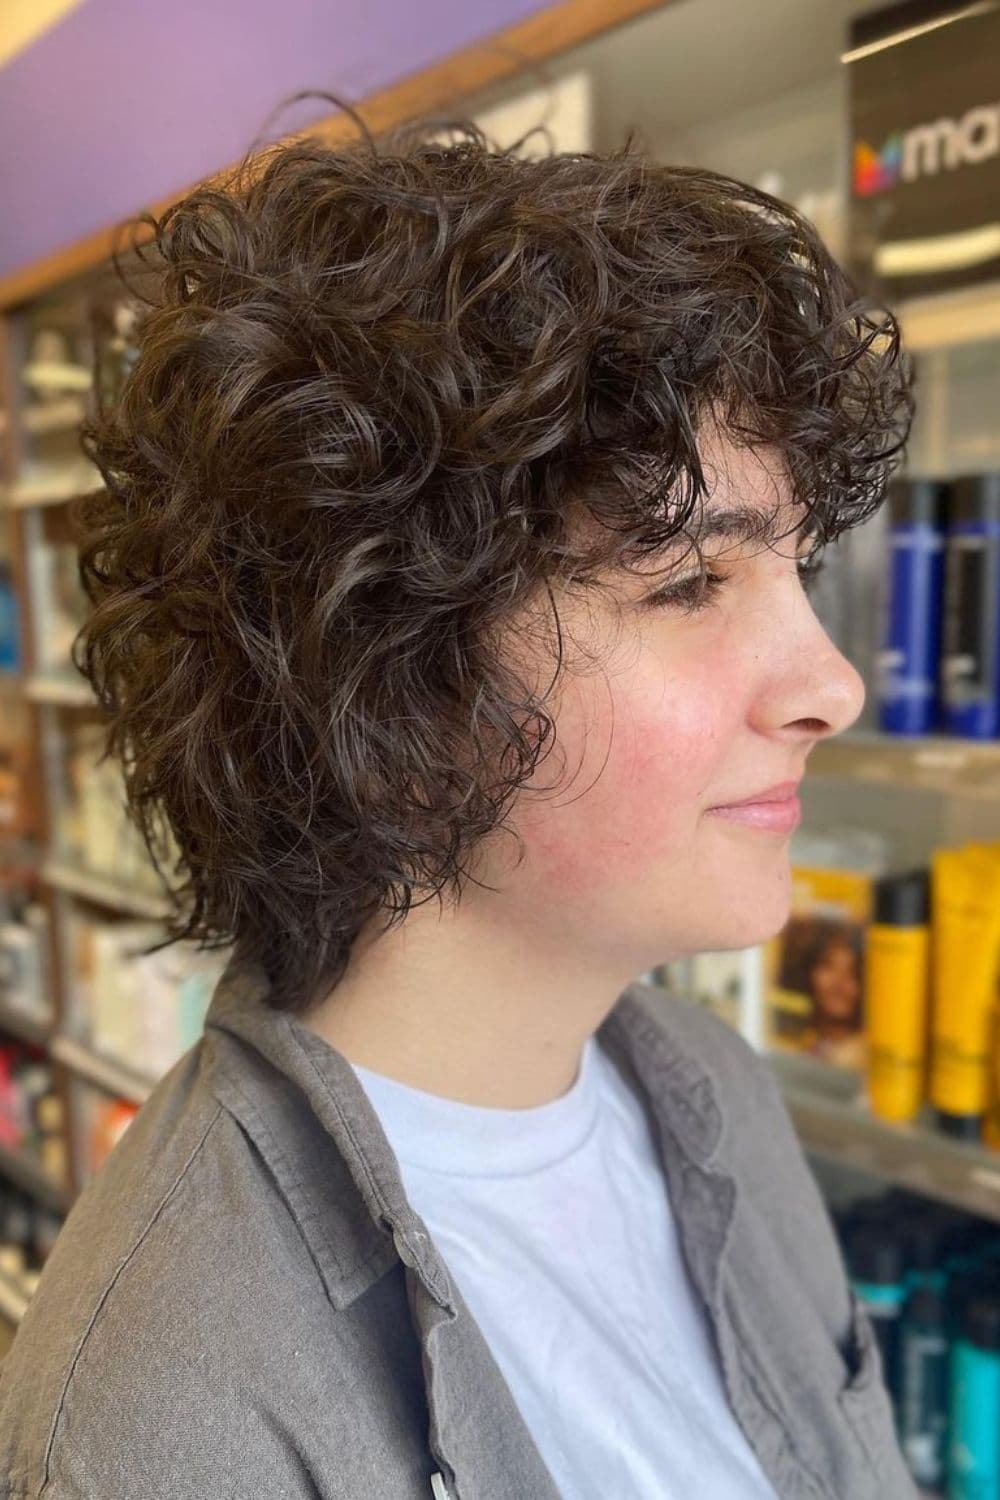 Side view of a woman with short curly wolf cut.